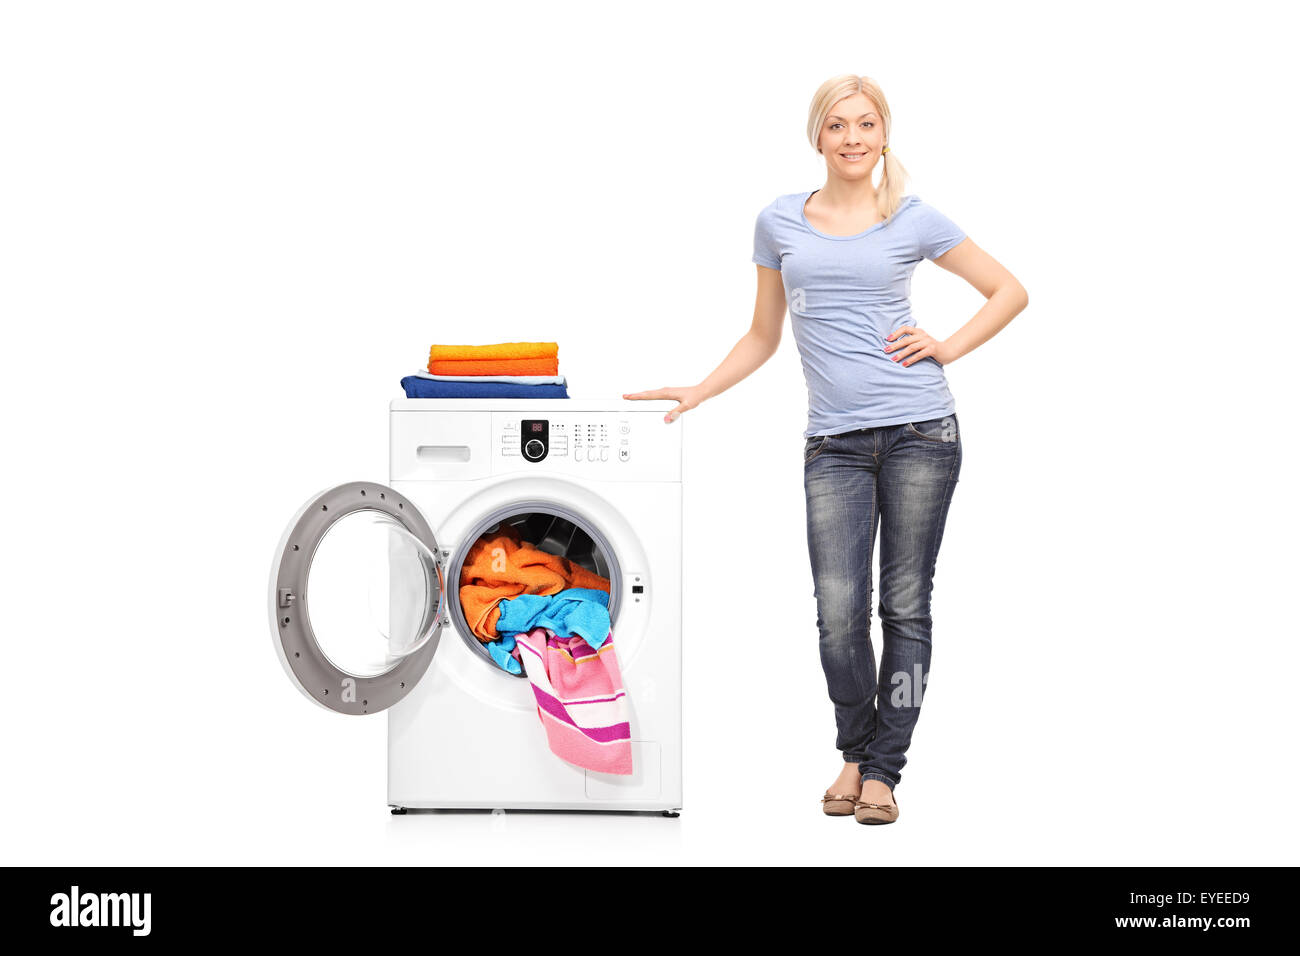 Full length portrait of a young woman standing next to a washing machine and looking at the camera isolated on white background Stock Photo